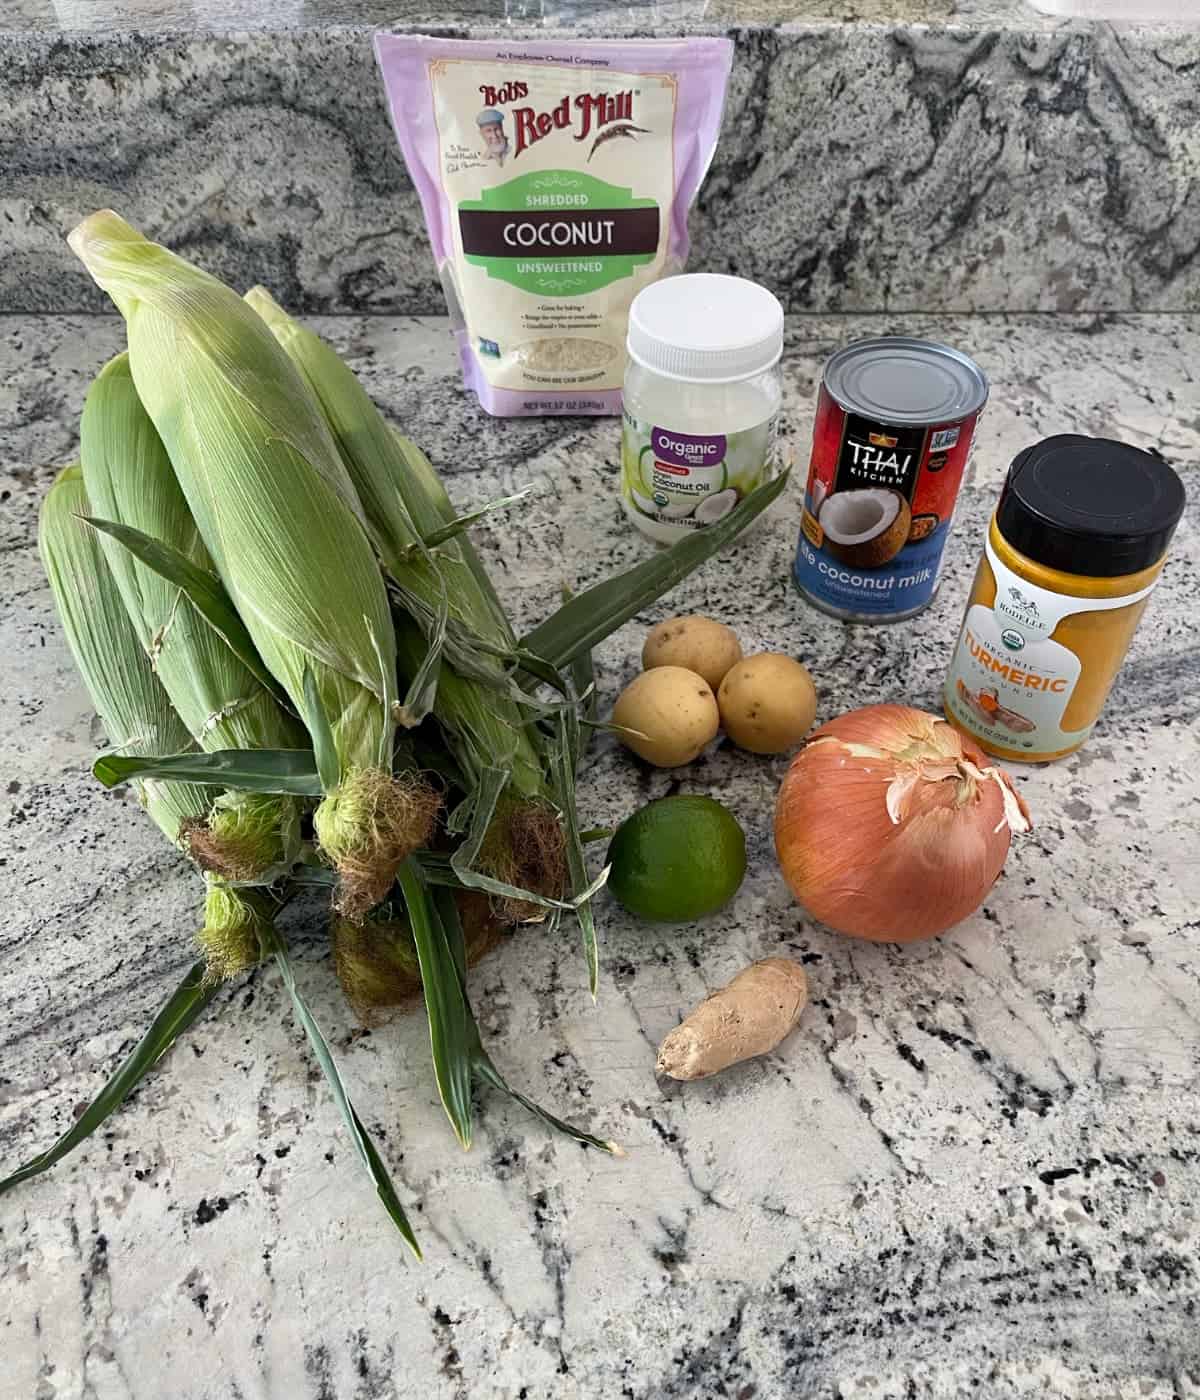 Ingredients for making coconut corn soup including corn on the cob, shredded coconut, coconut oil, coconut milk, potatoes, onion, ginger and lime.